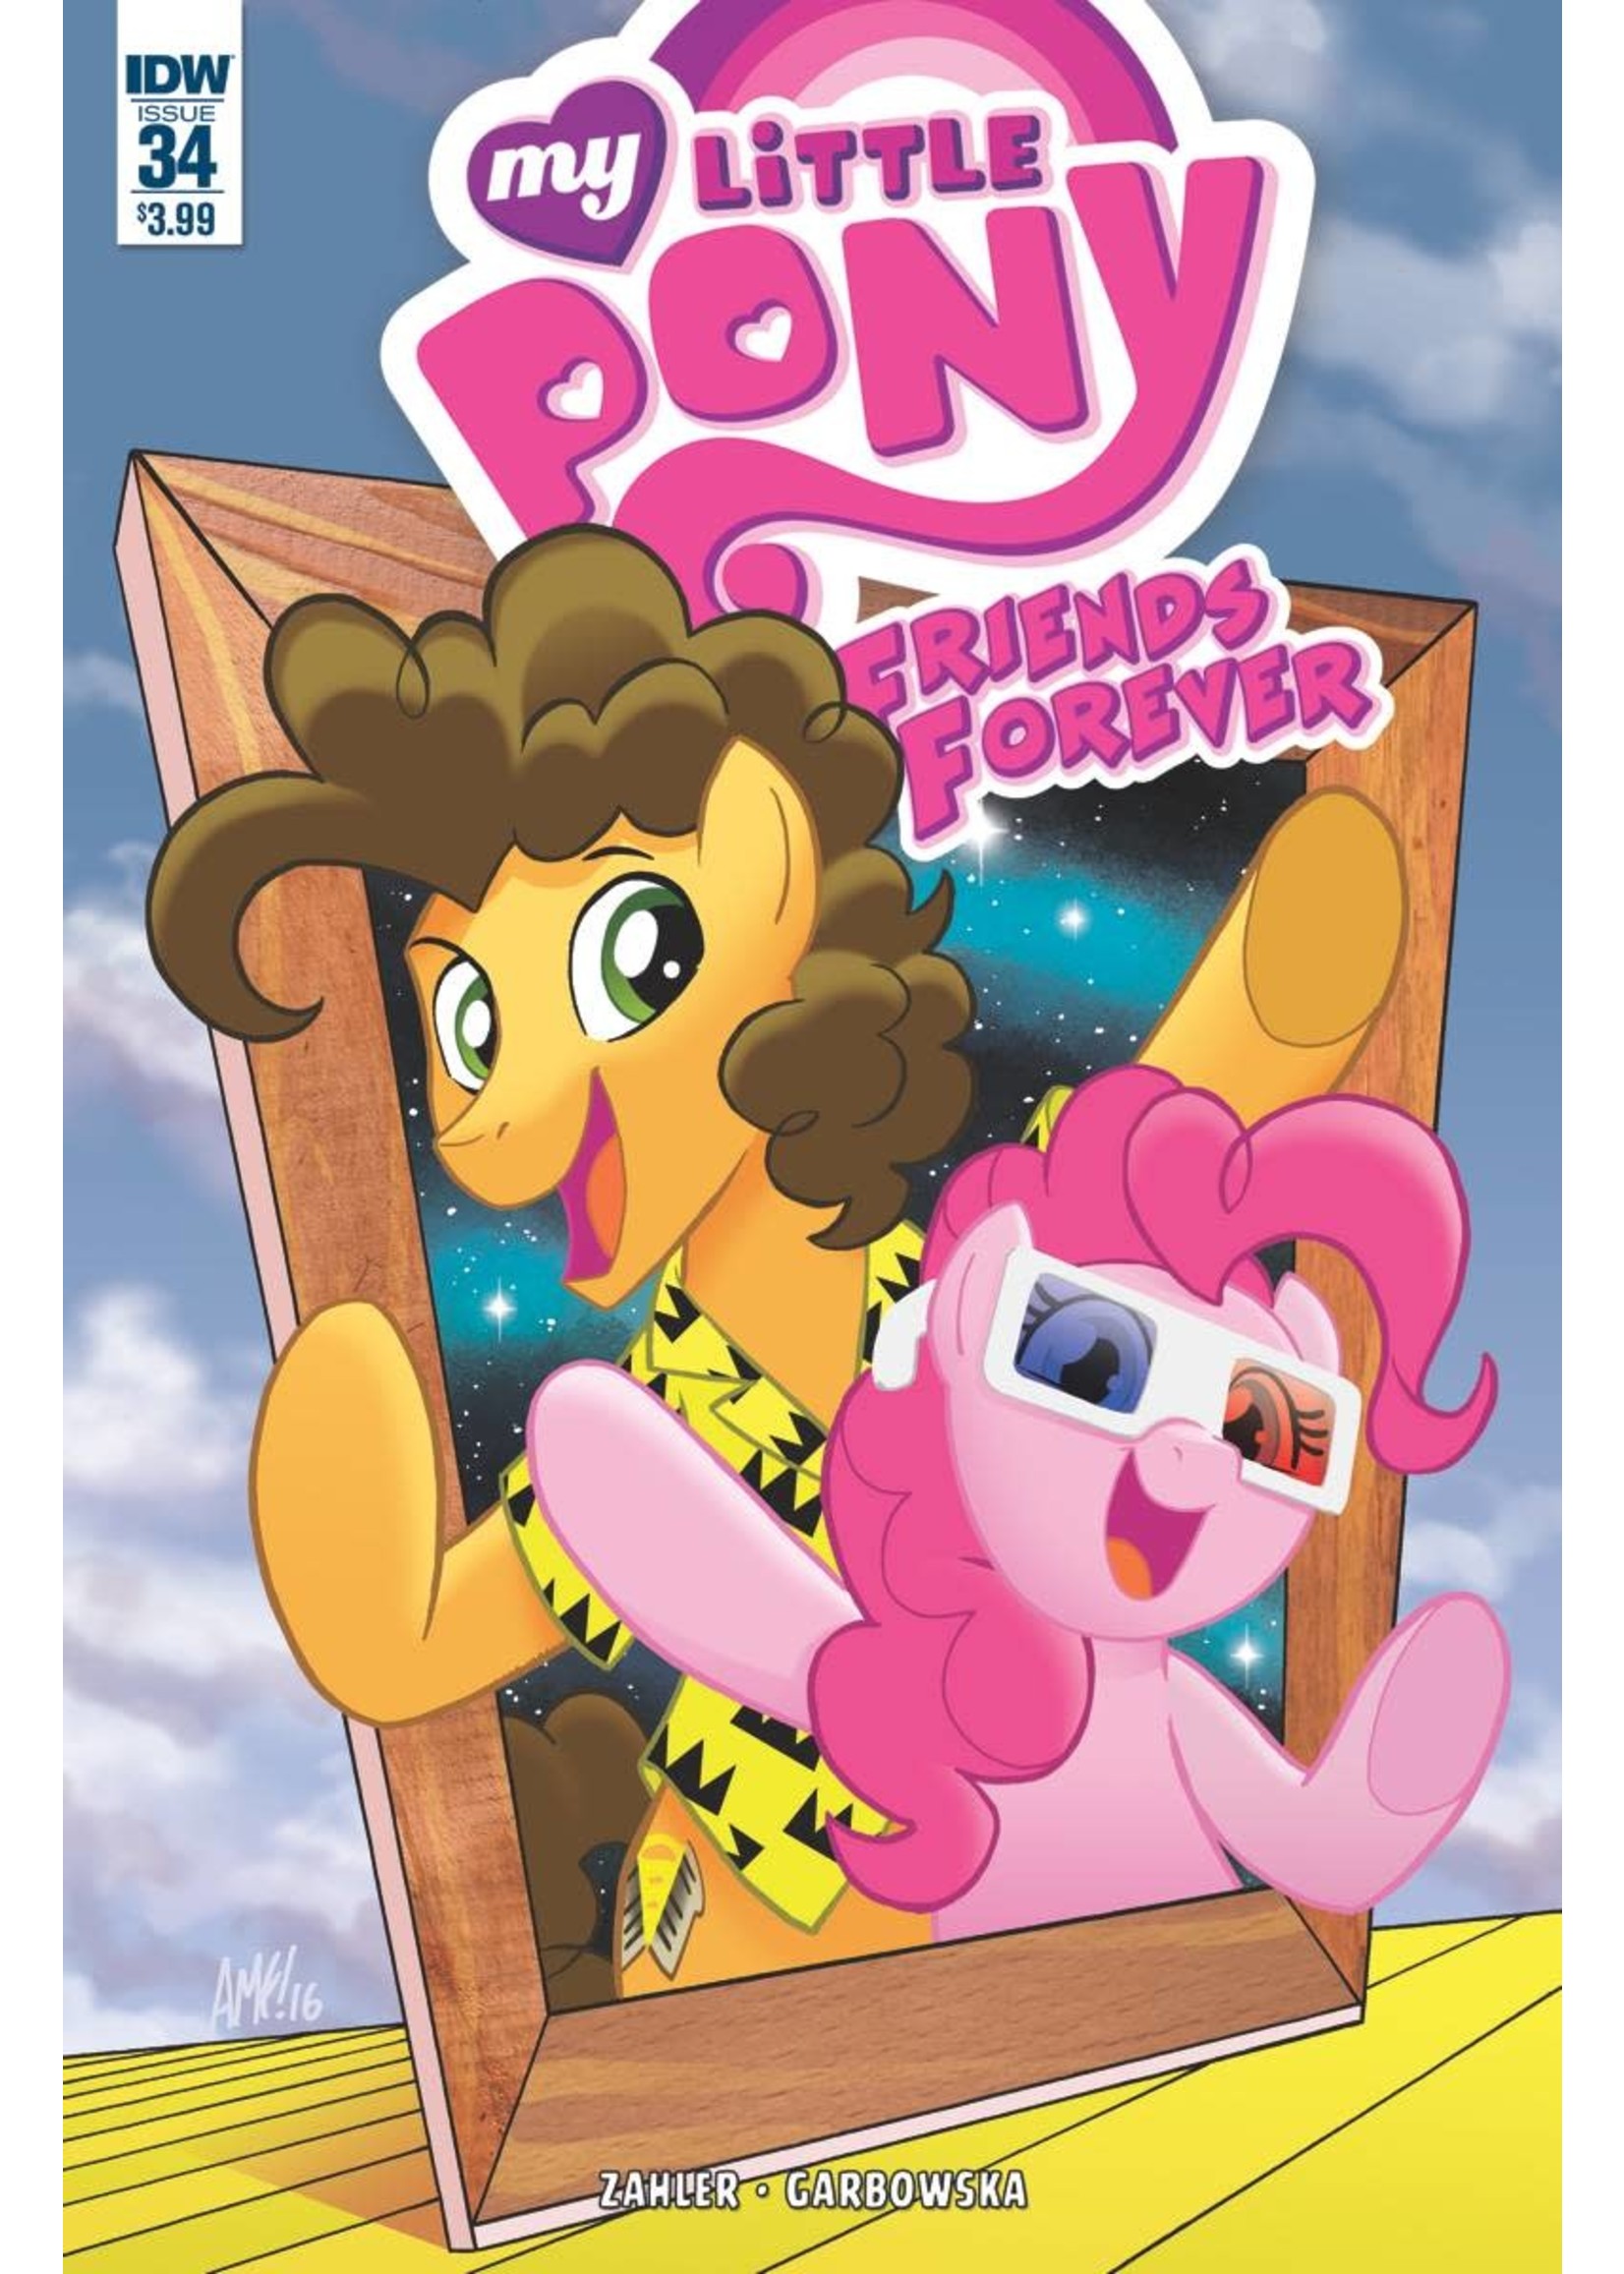 IDW PUBLISHING MY LITTLE PONY FRIENDS FOREVER #34